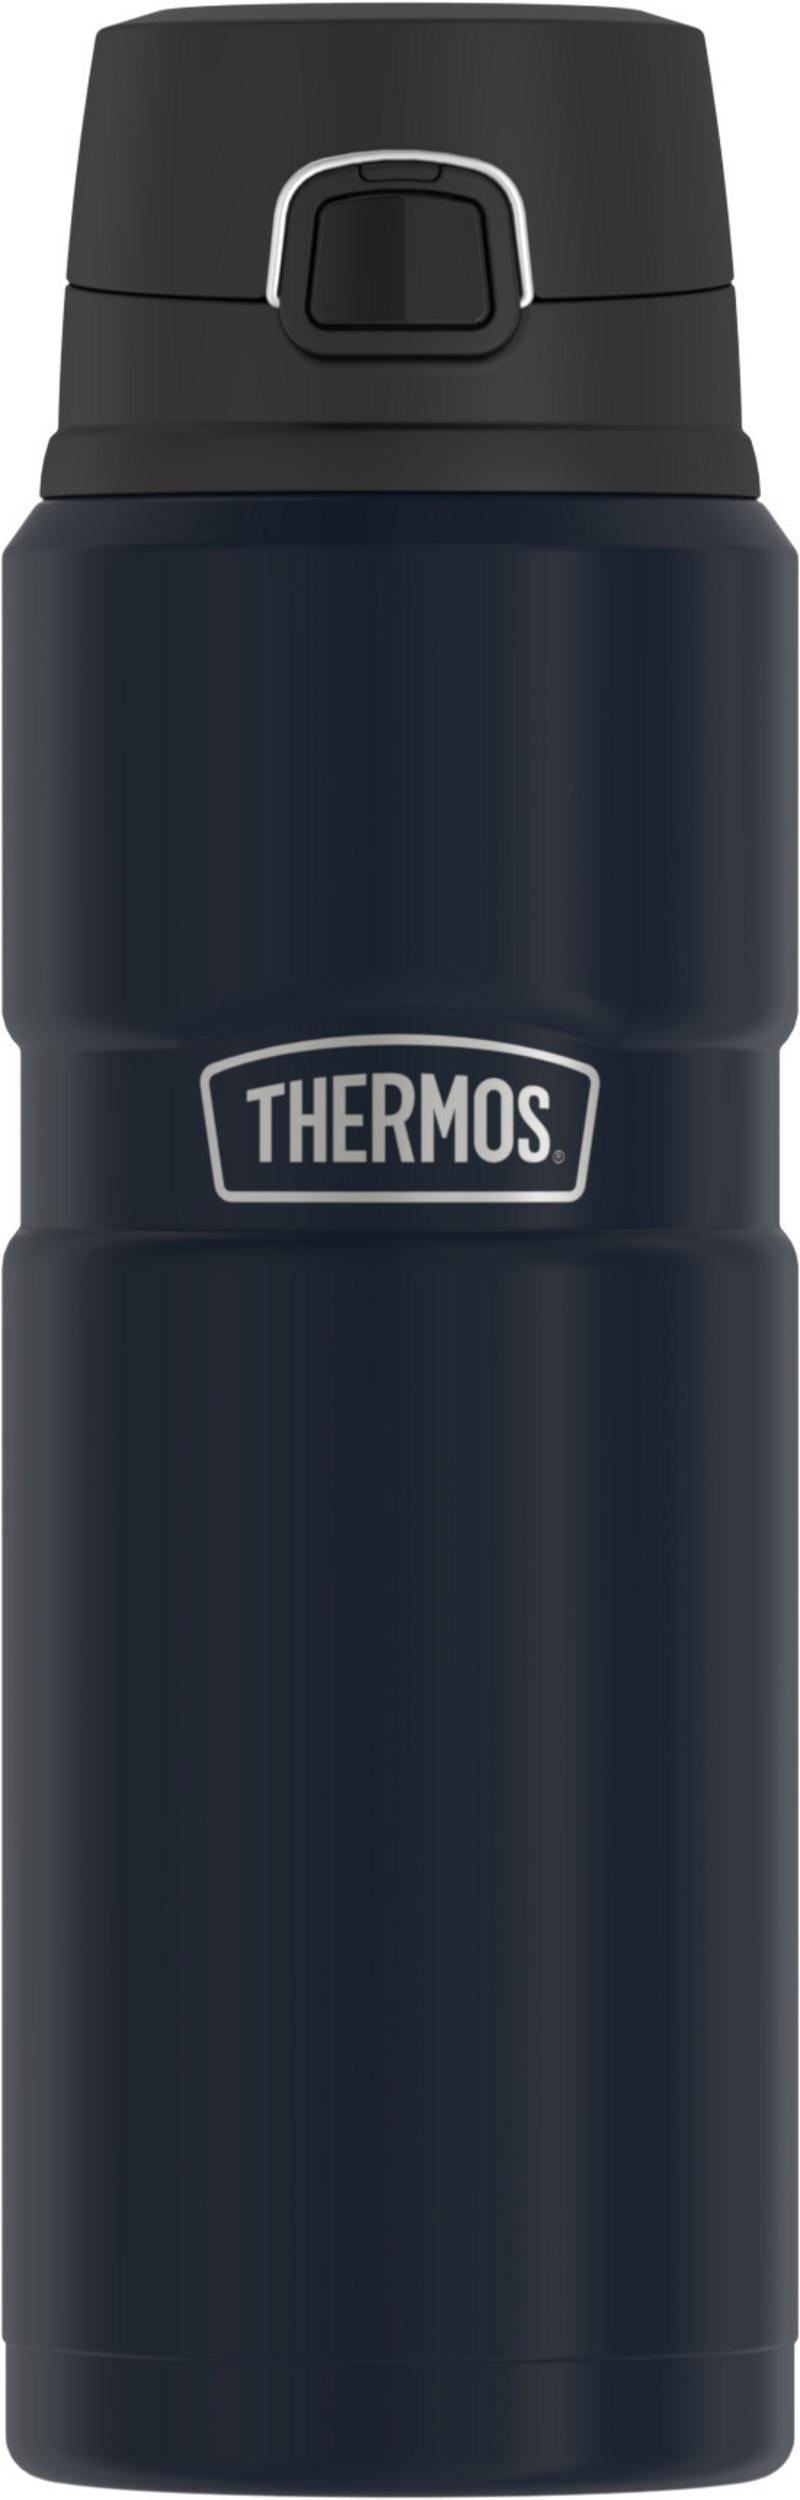  THERMOS Stainless King Vacuum-Insulated Drink Bottle